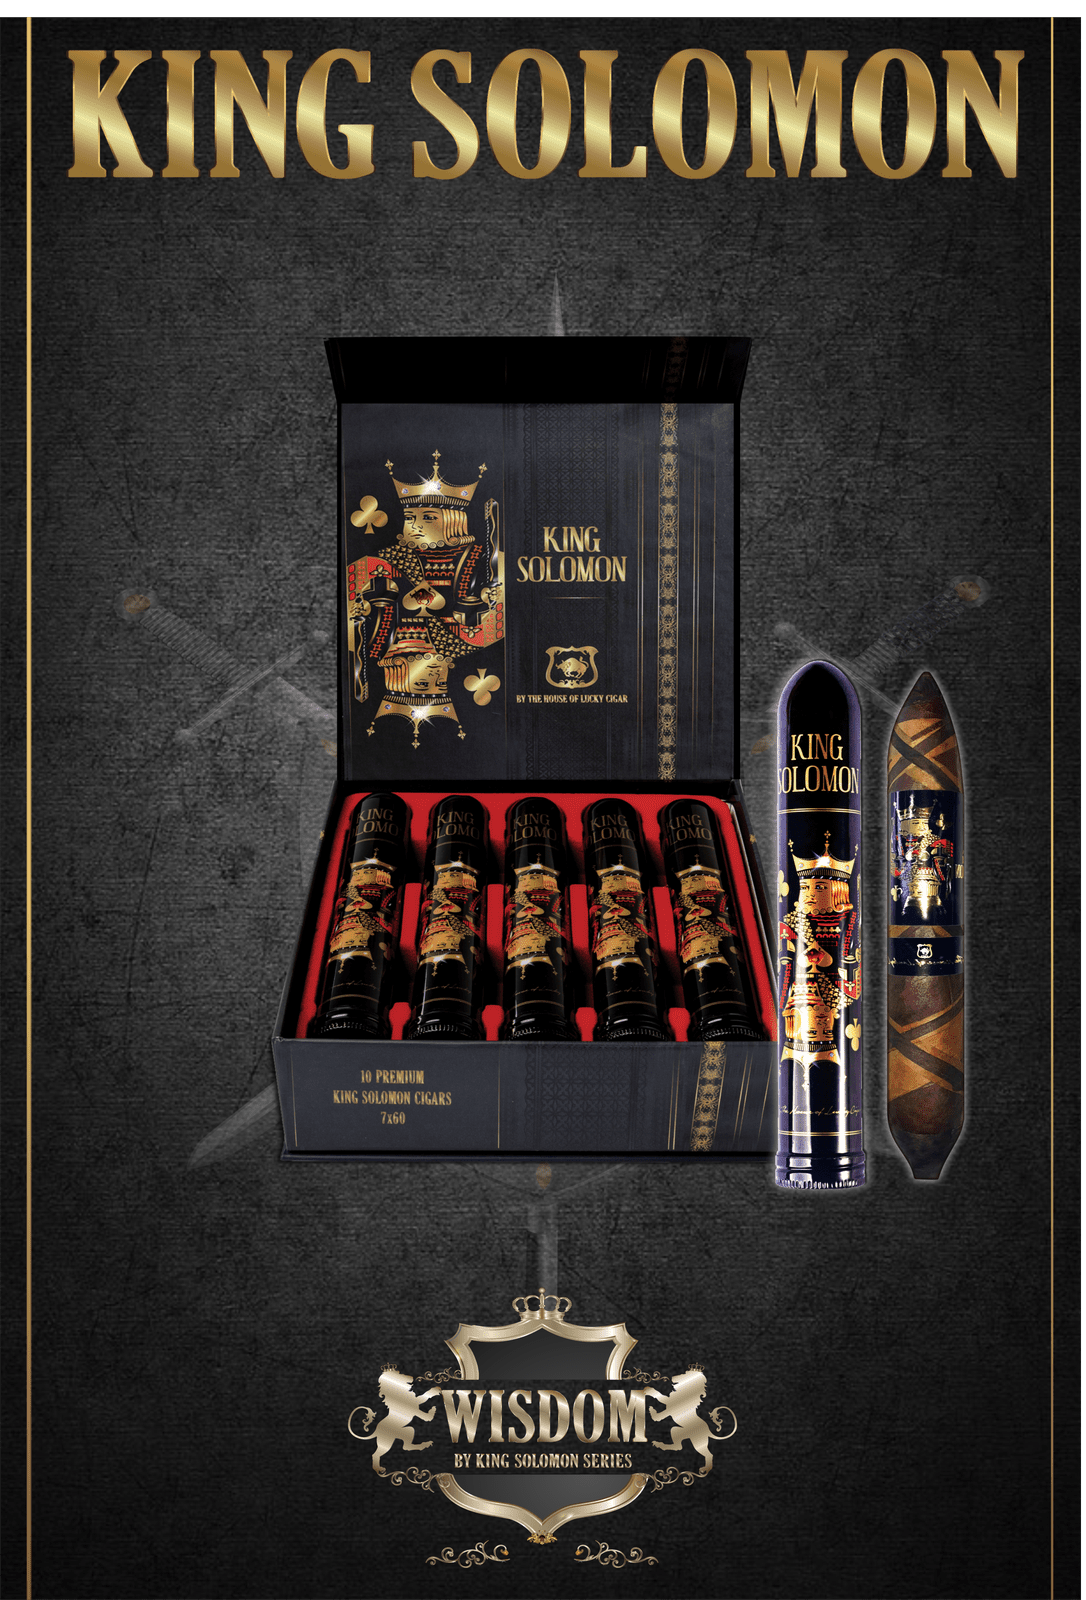 From The King Solomon Series: Solomon 7x60 Box of 10 Cigars in Tubes